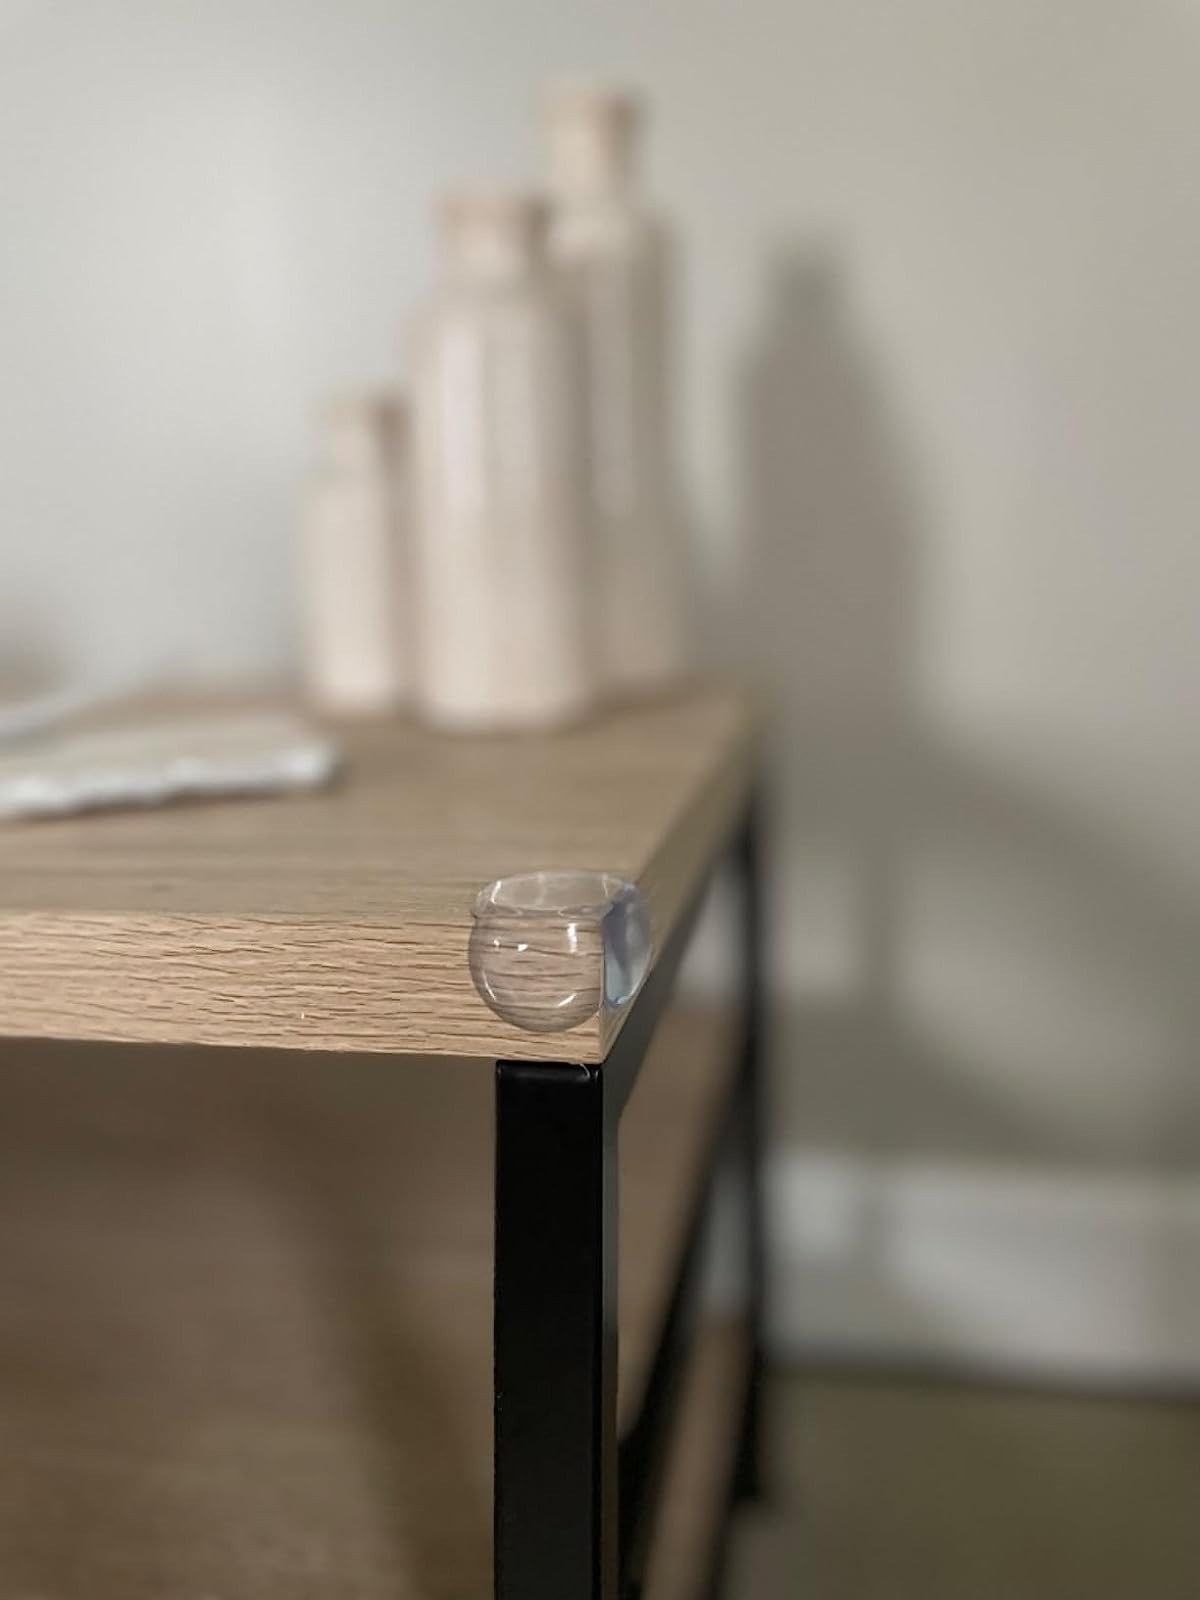 A corner protector on an end table